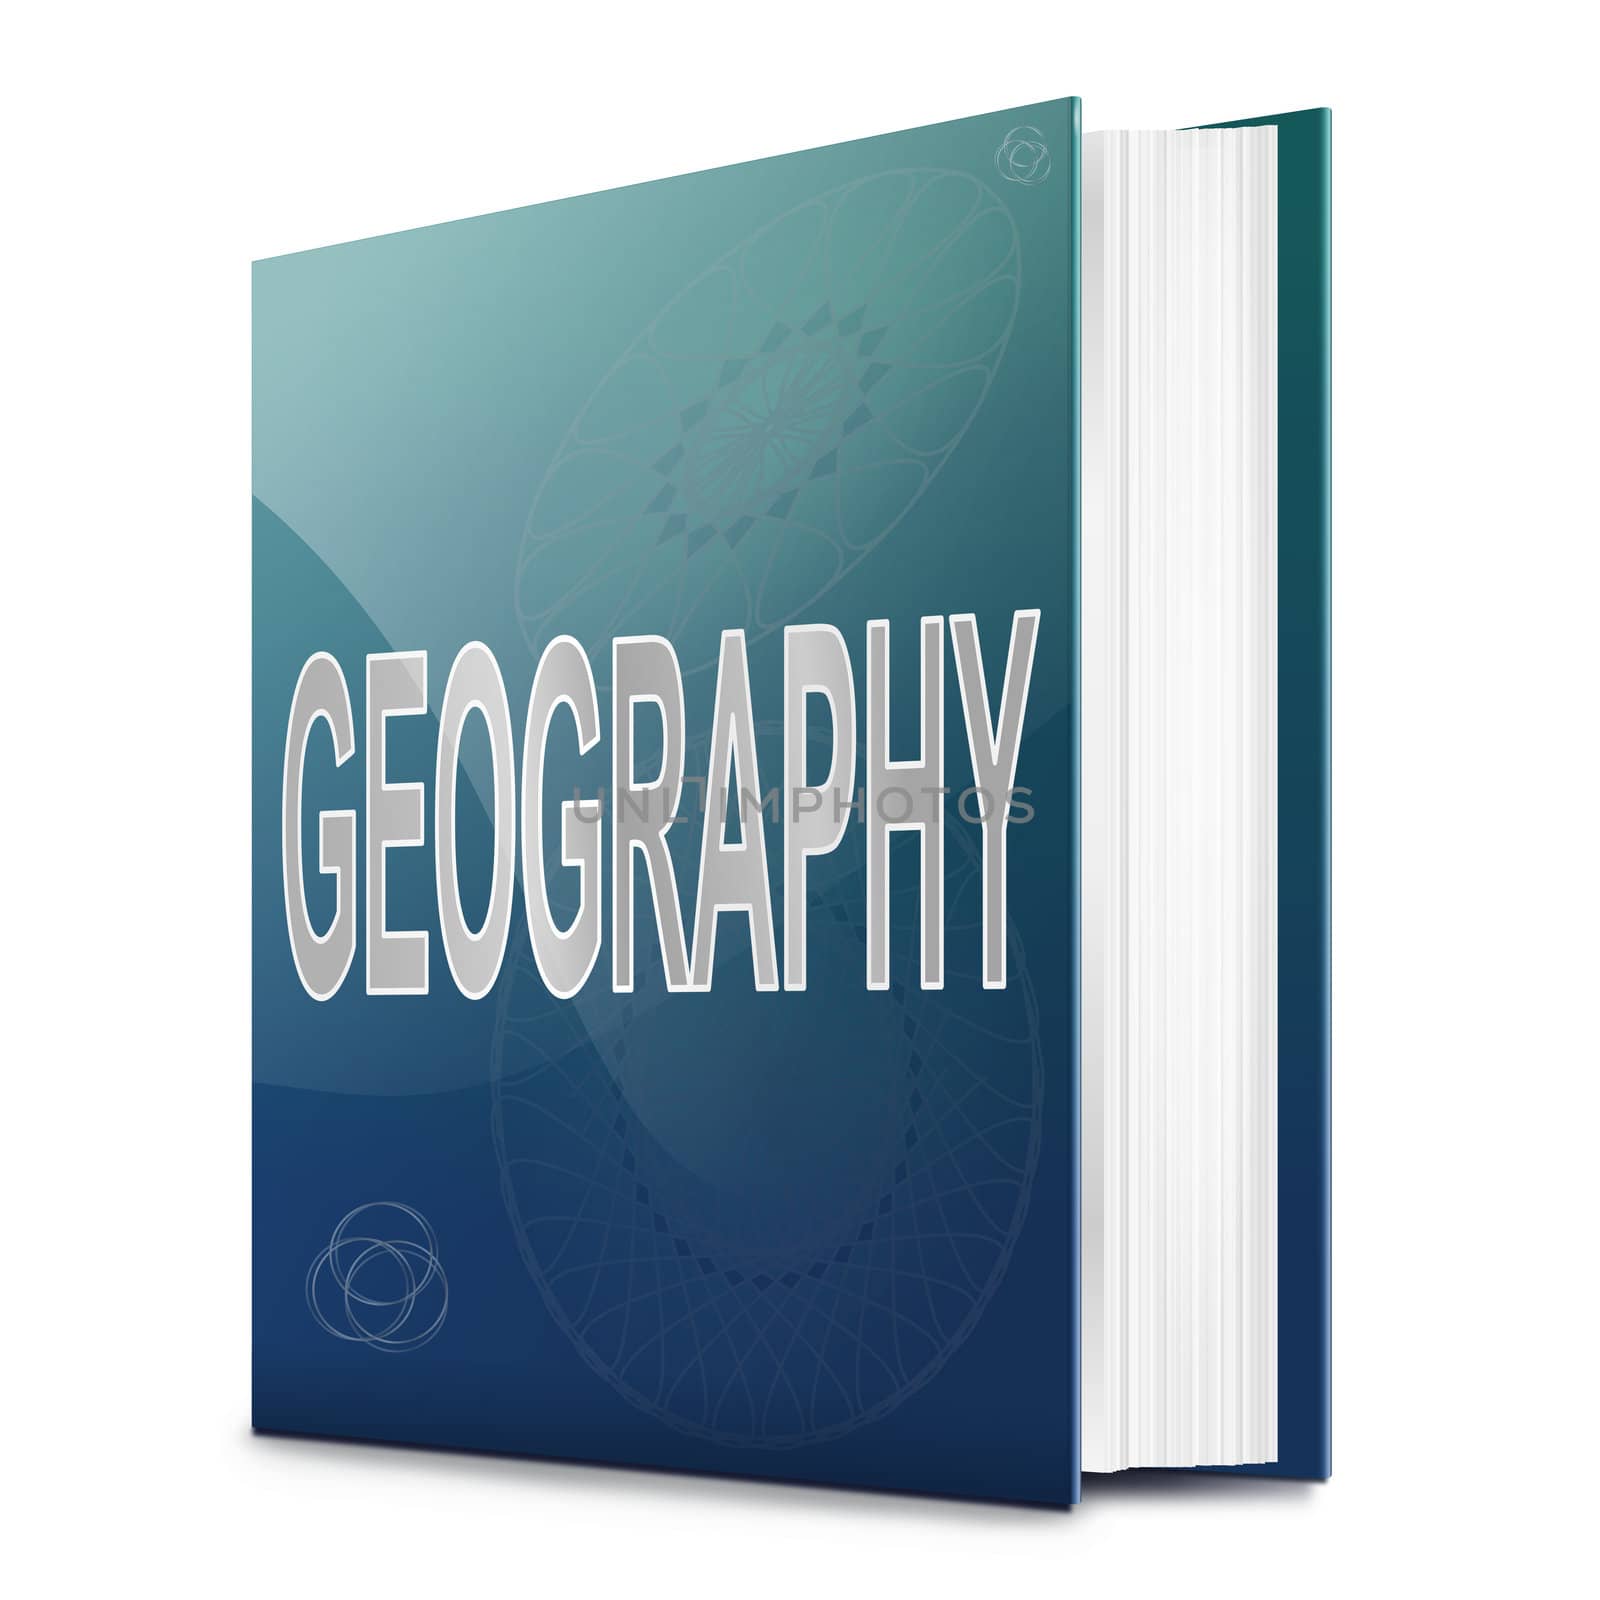 Illustration depicting a text book with a geography concept title. White background.